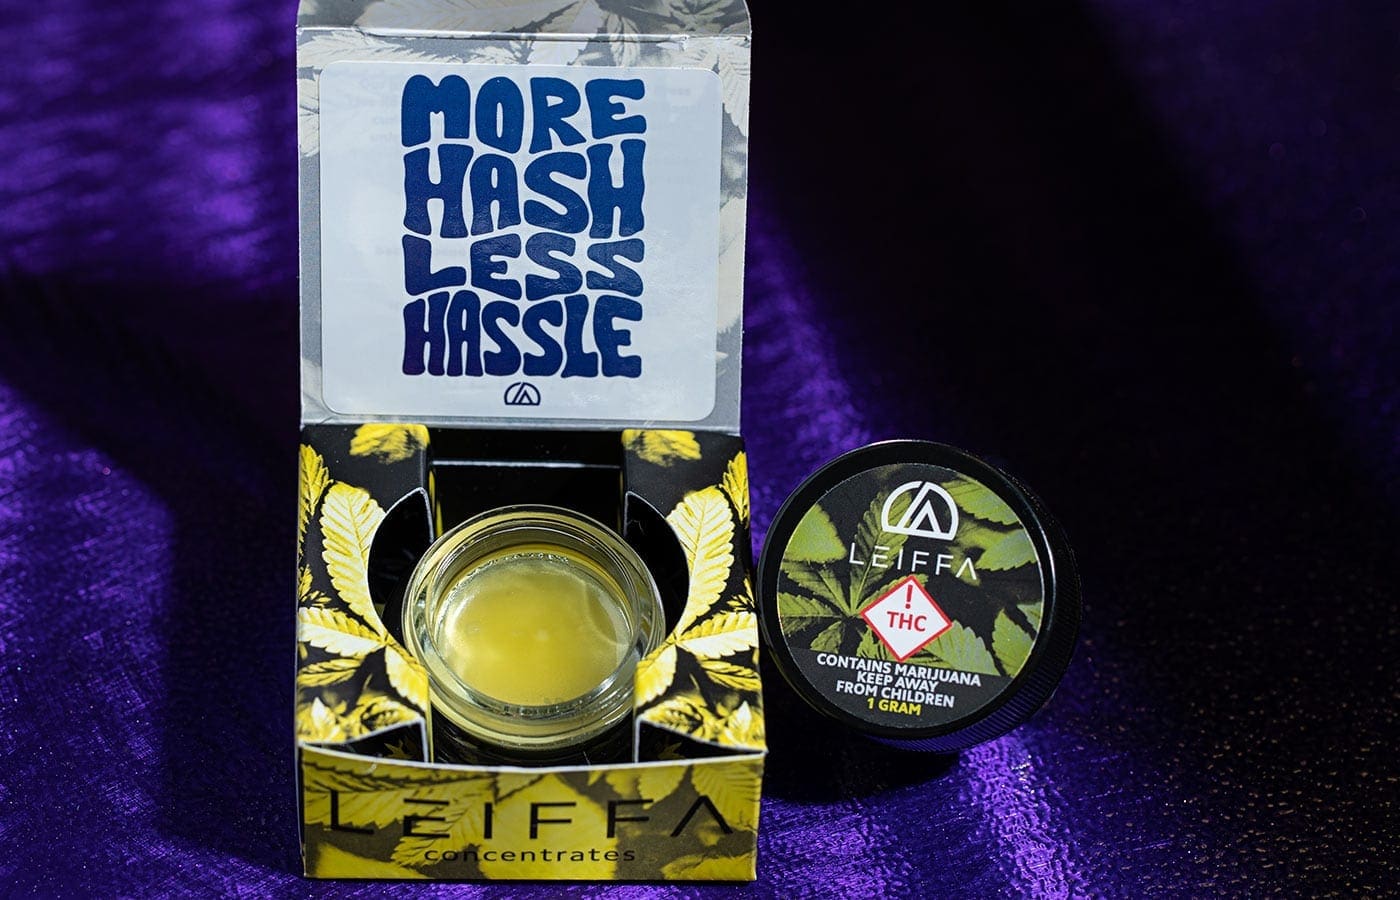 Leiffa hash concentrate in small jar. Oasis Superstore